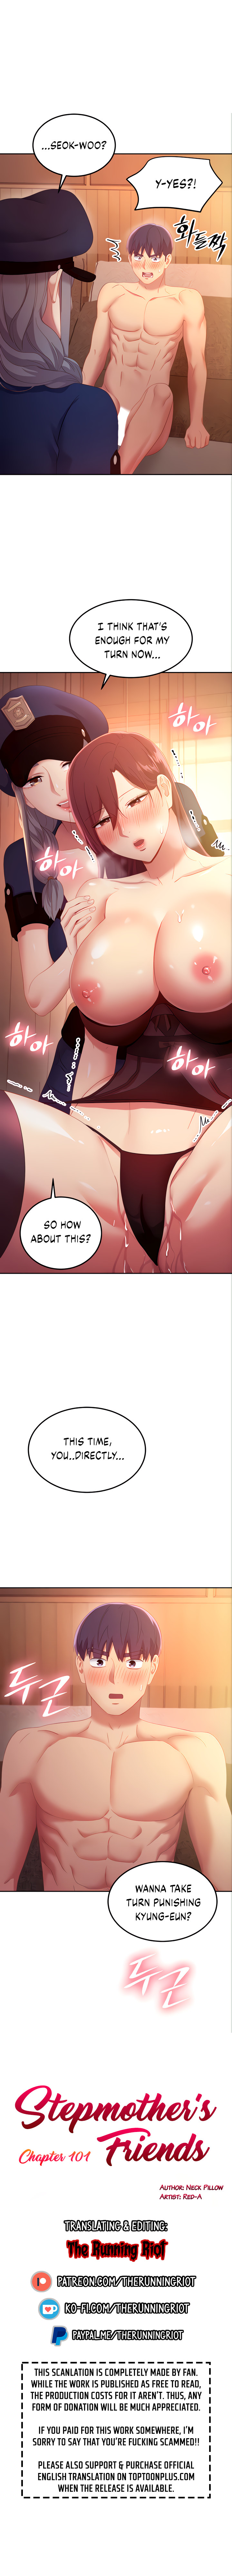 Panel Image 1 for chapter 101 of manhwa Stepmother